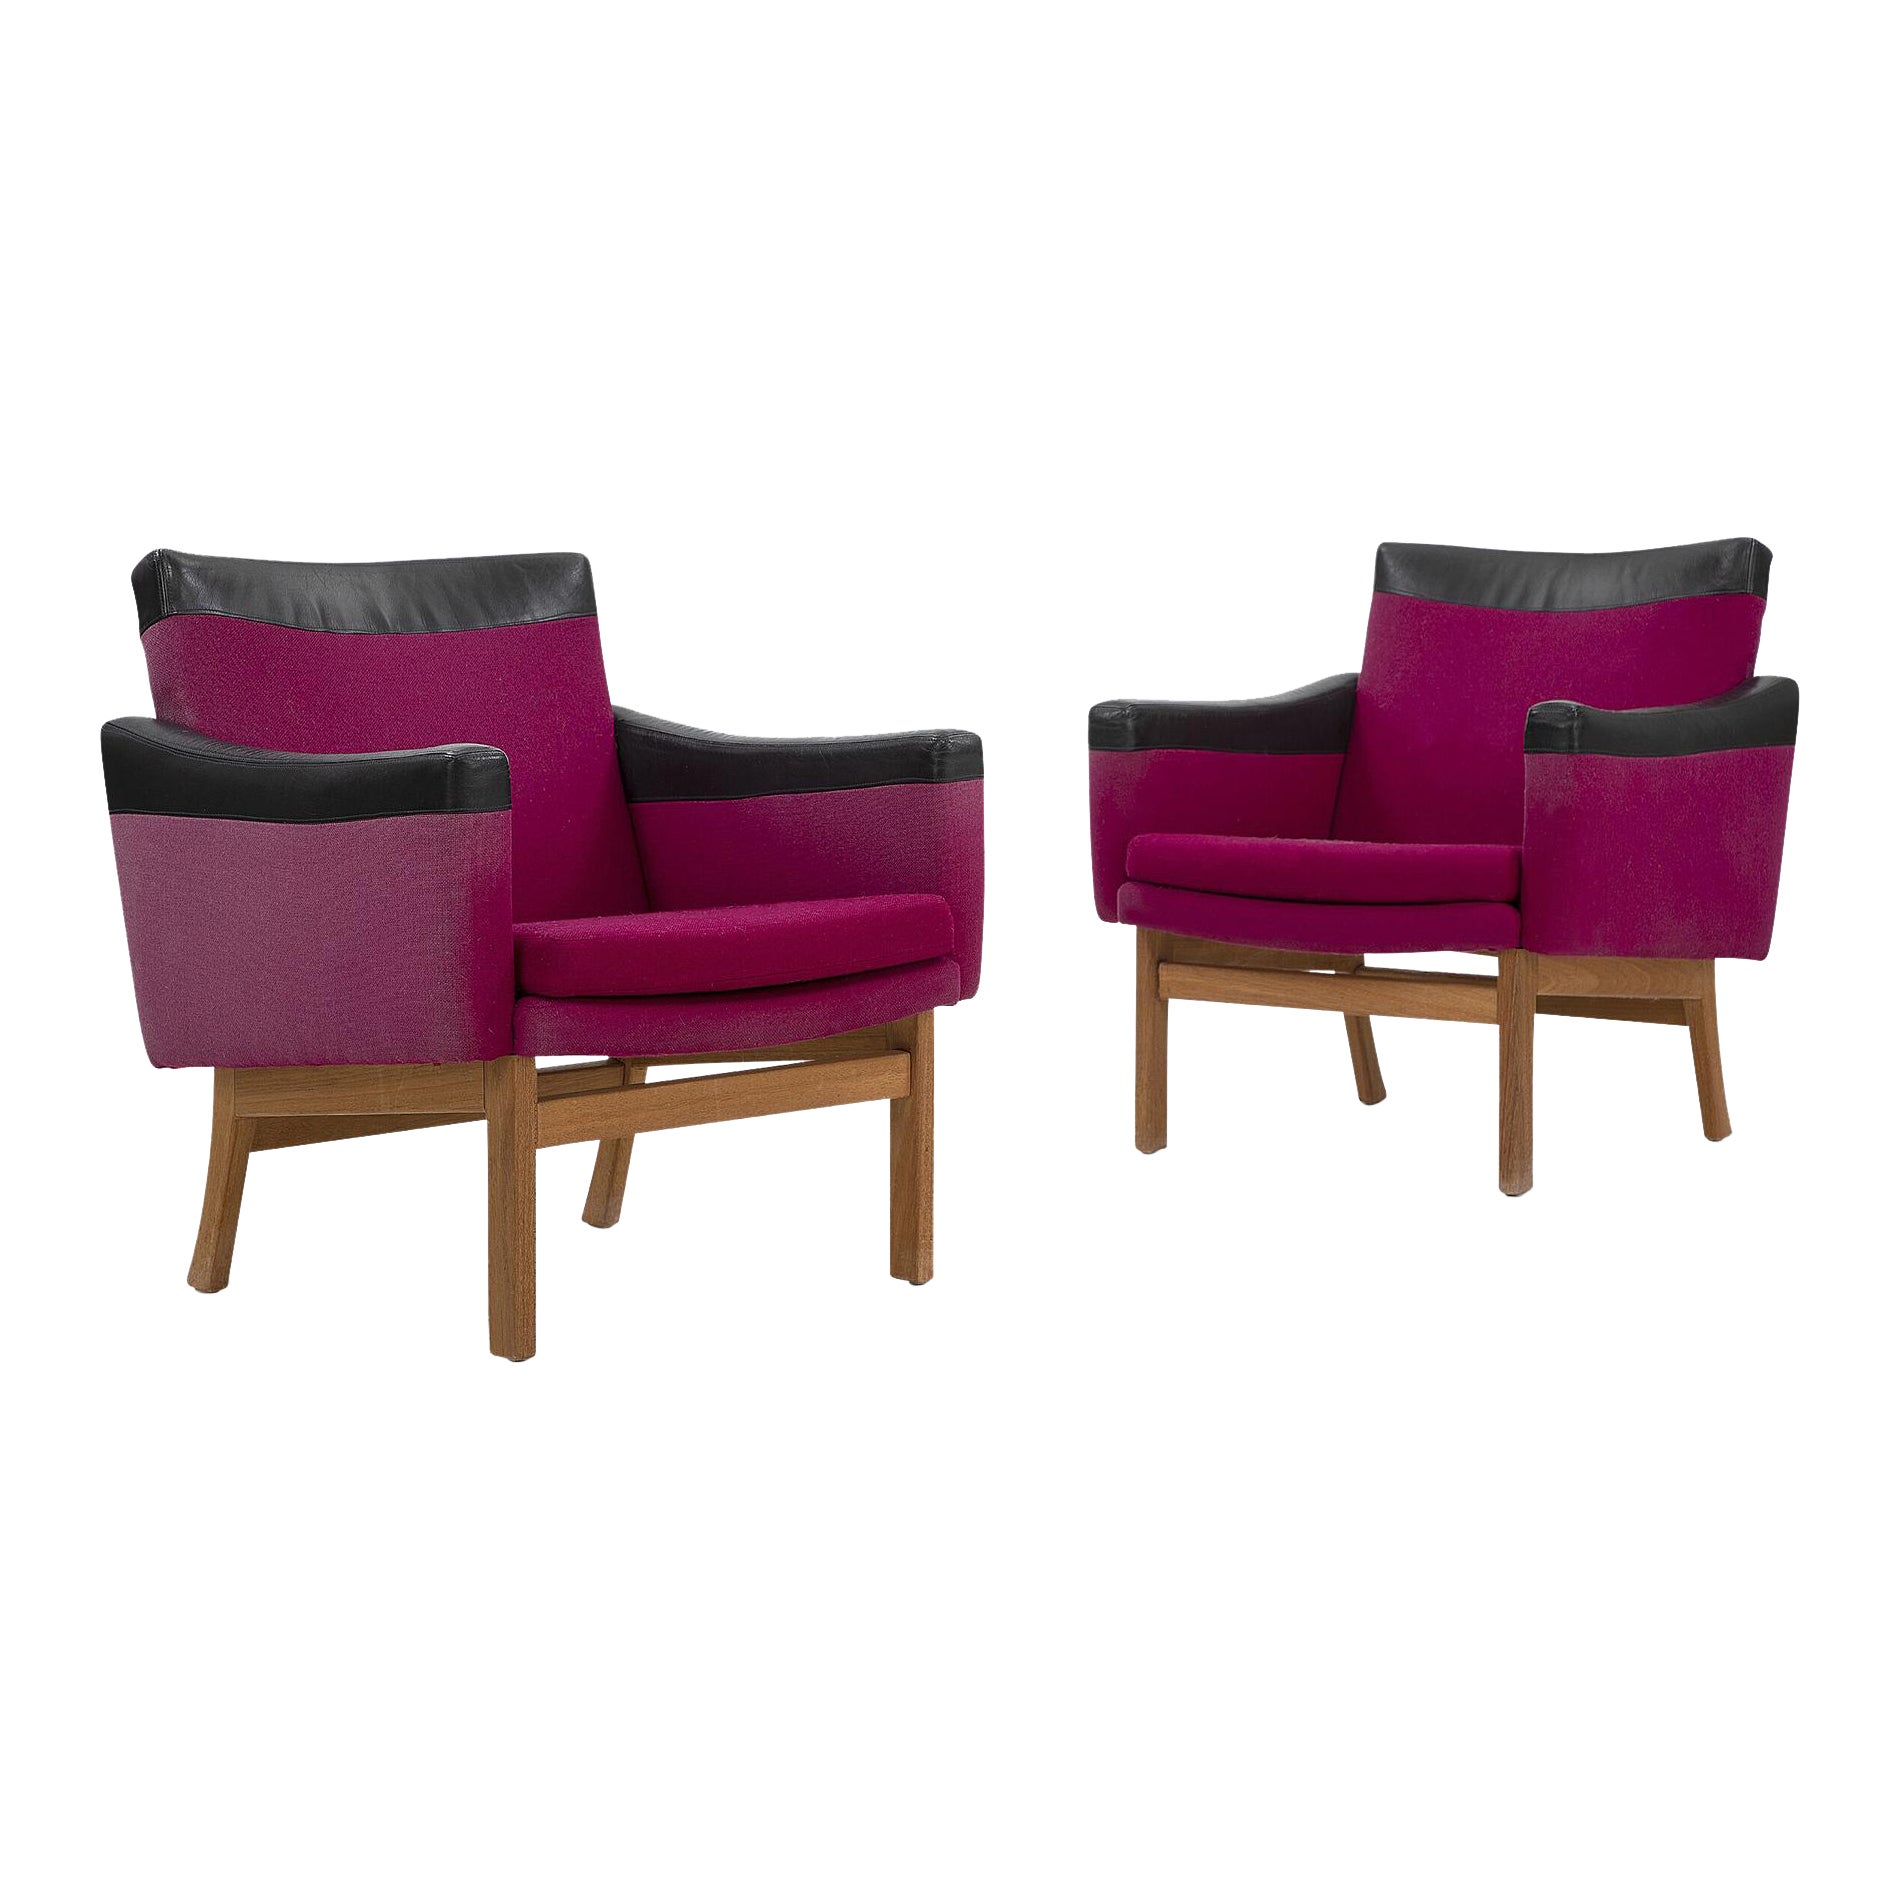 Pair Of Danish Modern Lounge Chairs In Wool + Leather For Sale